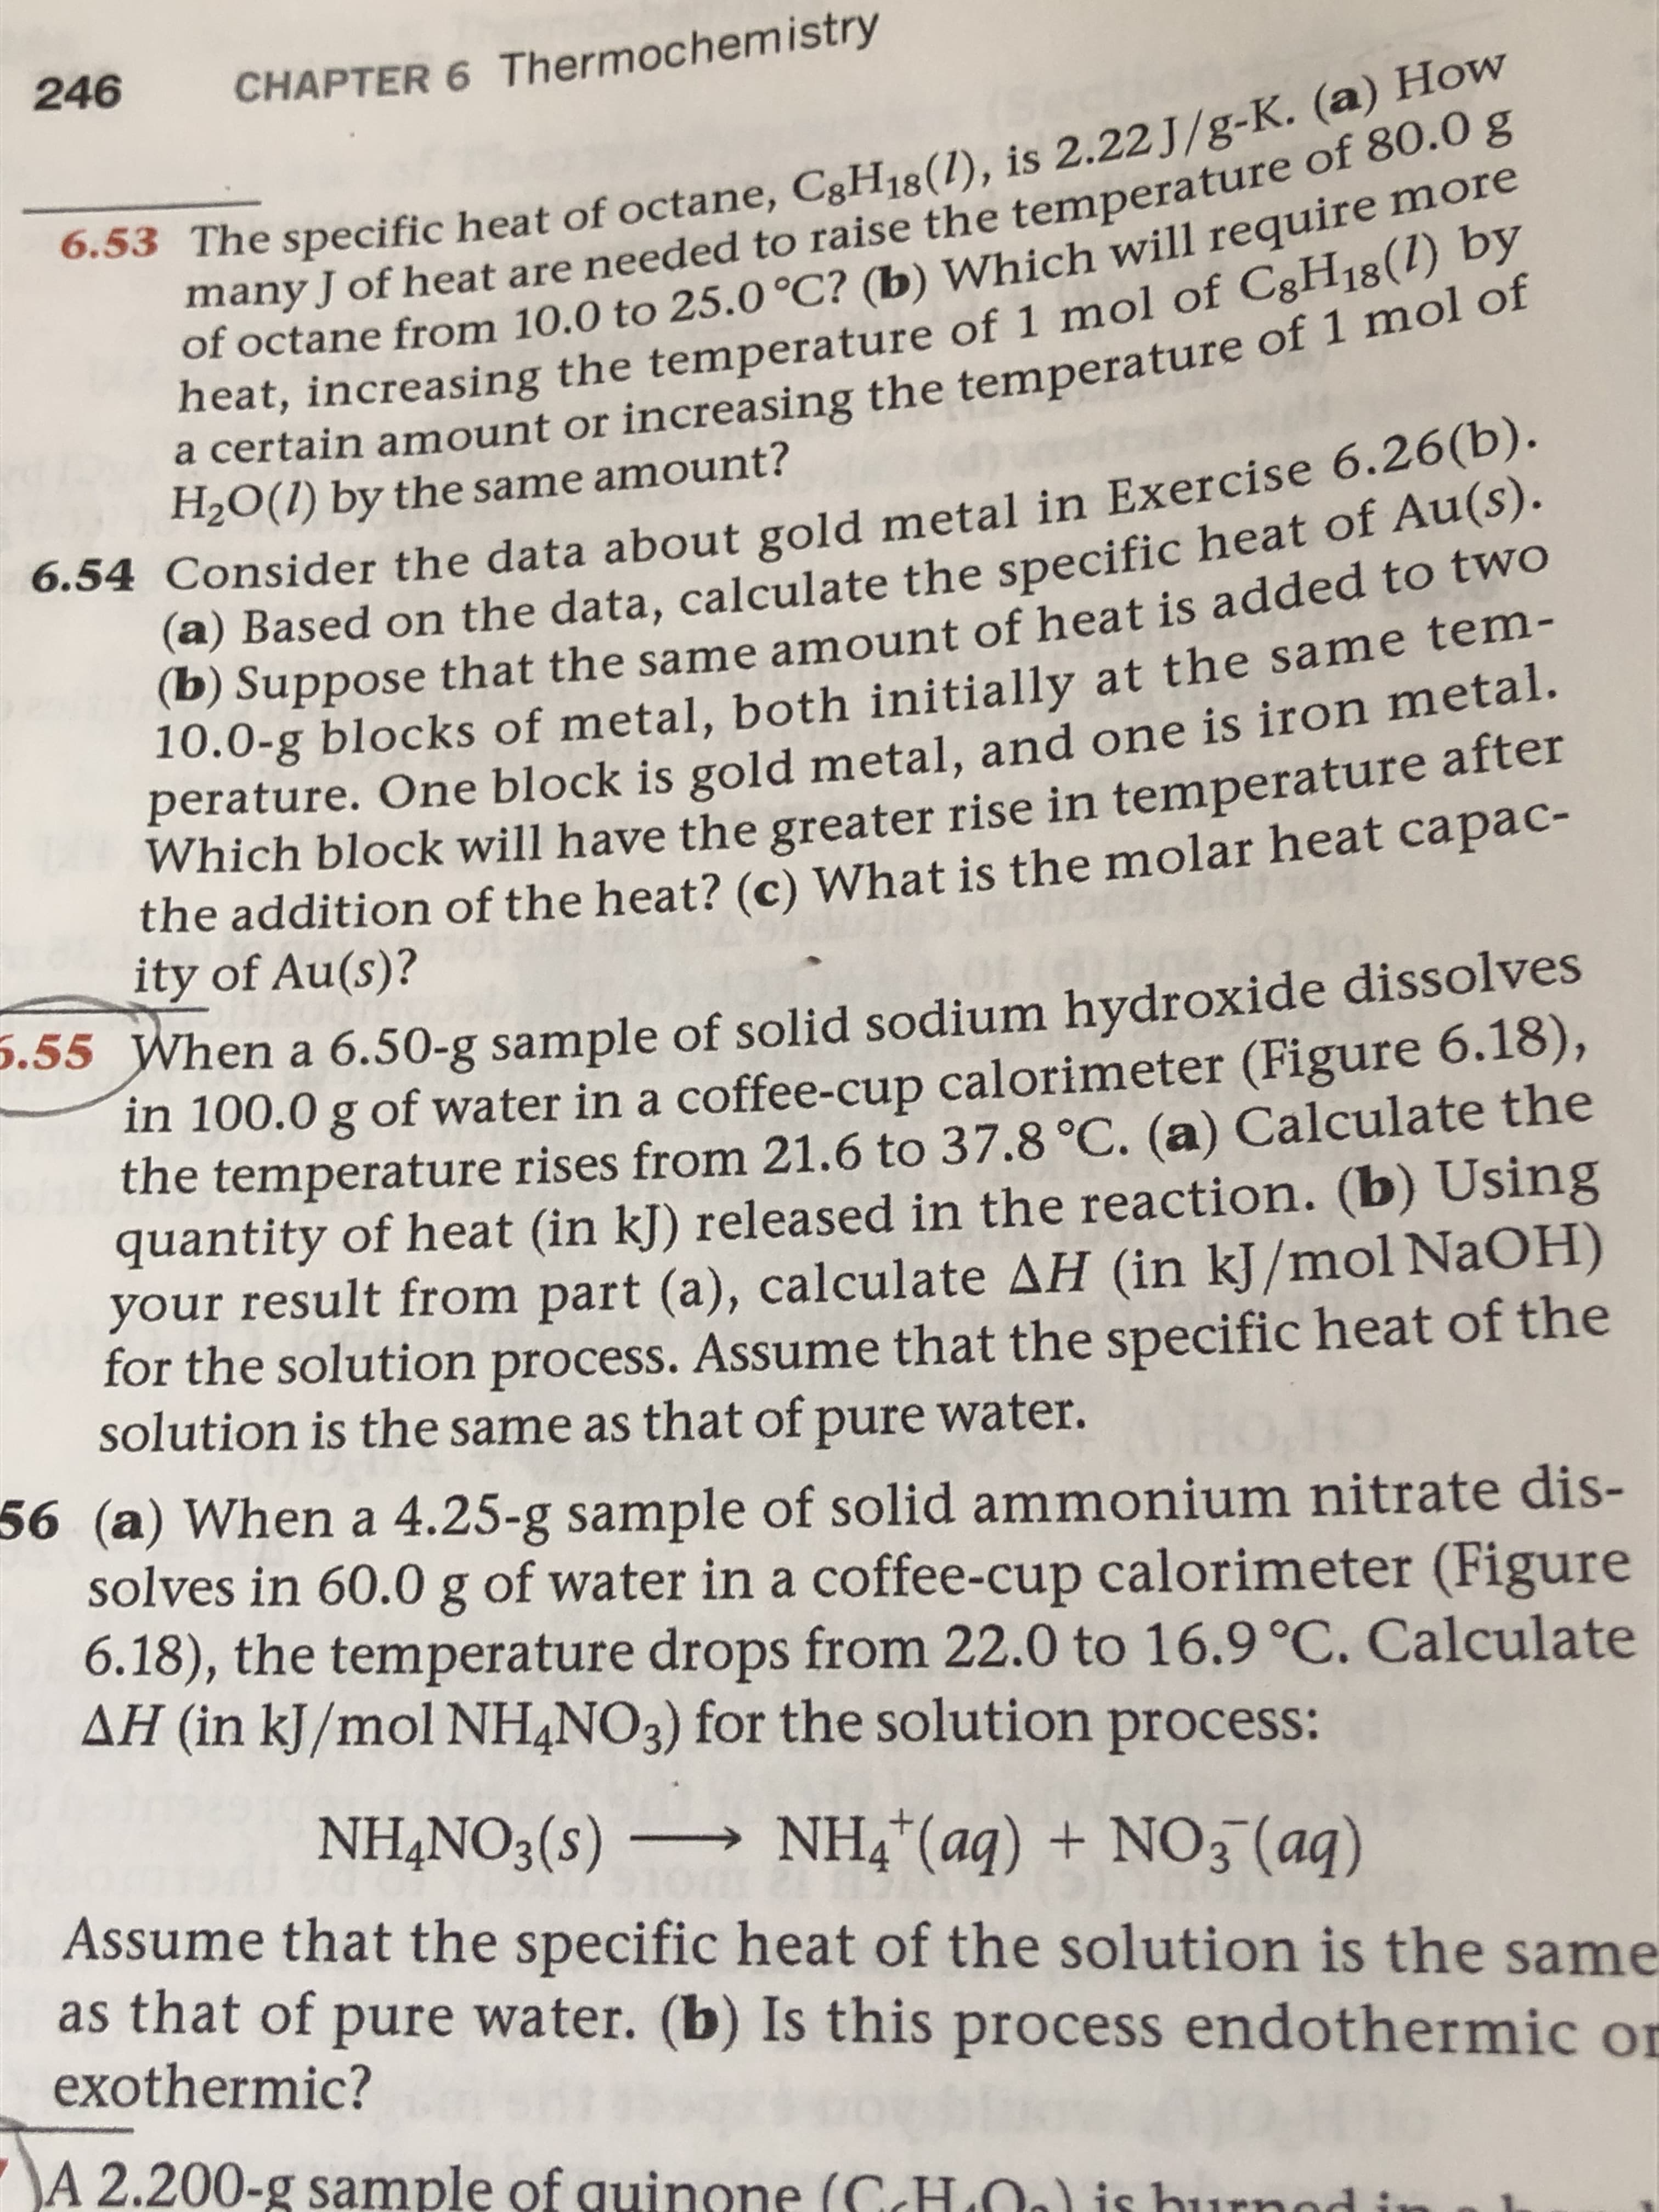 246
CHAPTER 6 Thermochemistry
6.53 The specific heat of octane, CgH18(1), is 2.22 J/g-K. (a) How
many J of heat are needed to raise the temperature of 80.0 g
of octane from 10.0 to 25.0 °C? (b) Which will require more
heat, increasing the temperature of 1 mol of CgH18(1) by
a certain amount or increasing the temperature of 1 mol of
H2O(1) by the same amount?
6.54 Consider the data about gold metal in Exercise 6.26(b).
(a) Based on the data, calculate the specific heat of Au(S).
(b) Suppose that the same amount of heat is added to twO
10.0-g blocks of metal, both initially at the same tem-
perature. One block is gold metal, and one is iron metal.
Which block will have the greater rise in temperature after
the addition of the heat? (c) What is the molar heat capac-
ity of Au(s)?
.55 When a 6.50-g sample of solid sodium hydroxide dissolves
in 100.0 g of water in a coffee-cup calorimeter (Figure 6.18),
the temperature rises from 21.6 to 37.8 °C. (a) Calculate the
quantity of heat (in kJ) released in the reaction. (b) Using
your result from part (a), calculate AH (in kJ/mol NaOH)
for the solution process. ASsume that the specific heat of the
solution is the same as that of pure water.
56 (a) When a 4.25-g sample of solid ammonium nitrate dis-
solves in 60.0 g of water in a coffee-cup calorimeter (Figure
6.18), the temperature drops from 22.0 to 16.9°C. Calculate
AH (in kJ/mol NH4NO3) for the solution process:
NH,NO3(s) –
NH4*(aq) + NO3 (aq)
Assume that the specific heat of the solution is the same
as that of pure water. (b) Is this process endothermic or
exothermic?
\A 2.200-g sample of quinone (CHLOO) is burnod
